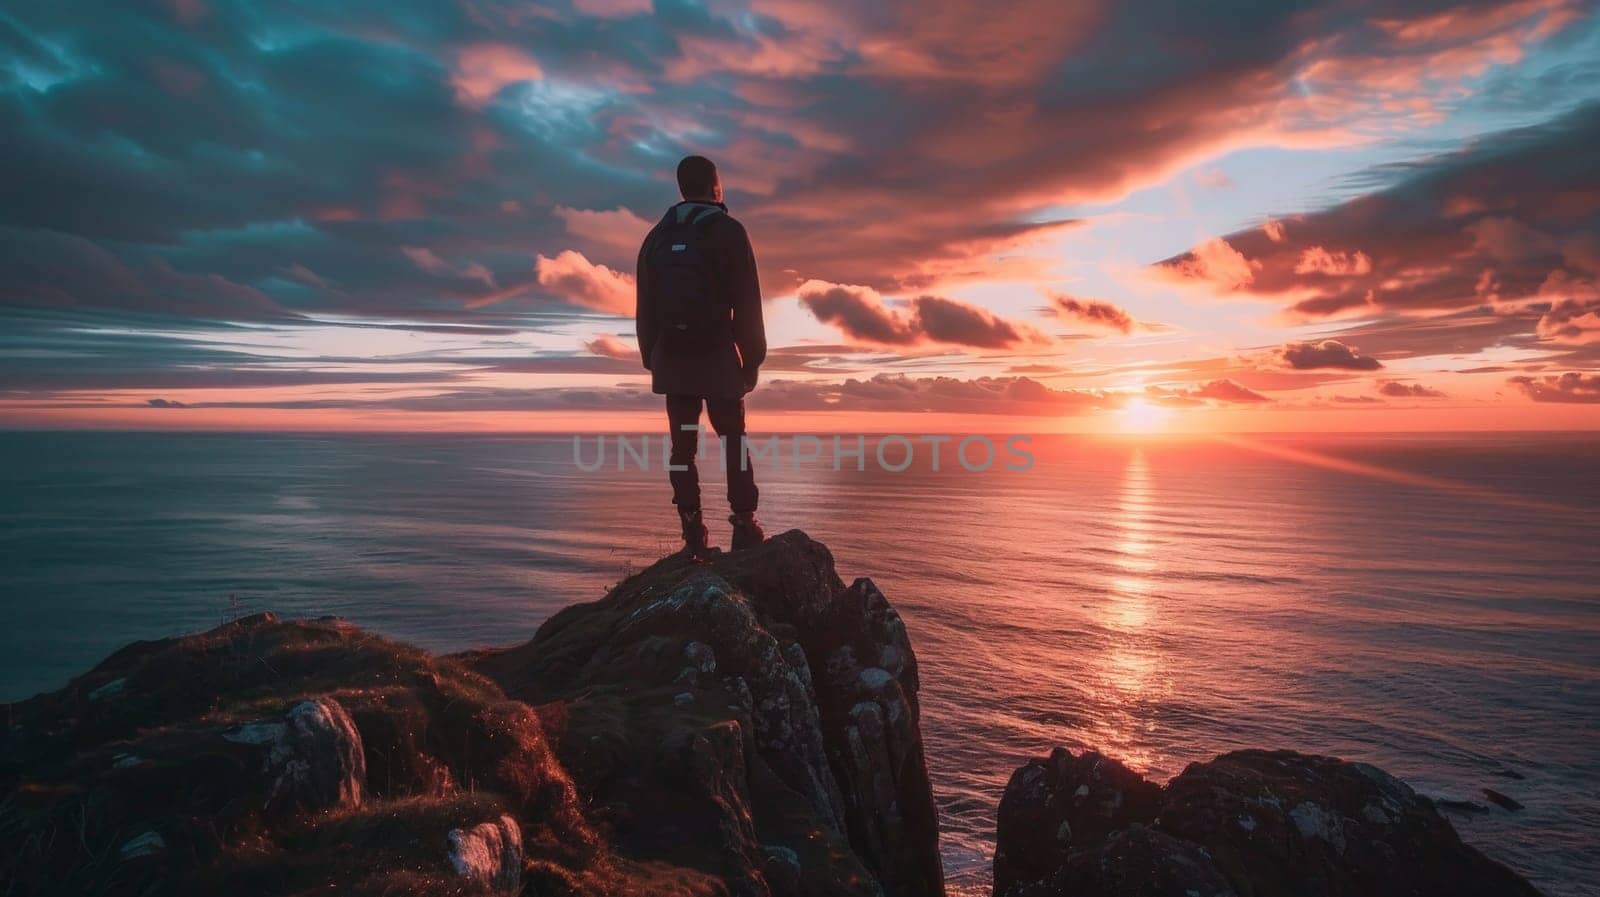 A man stands on a rock overlooking the ocean at sunset. The sky is filled with clouds and the sun is setting, creating a beautiful and serene atmosphere. The man is lost in thought